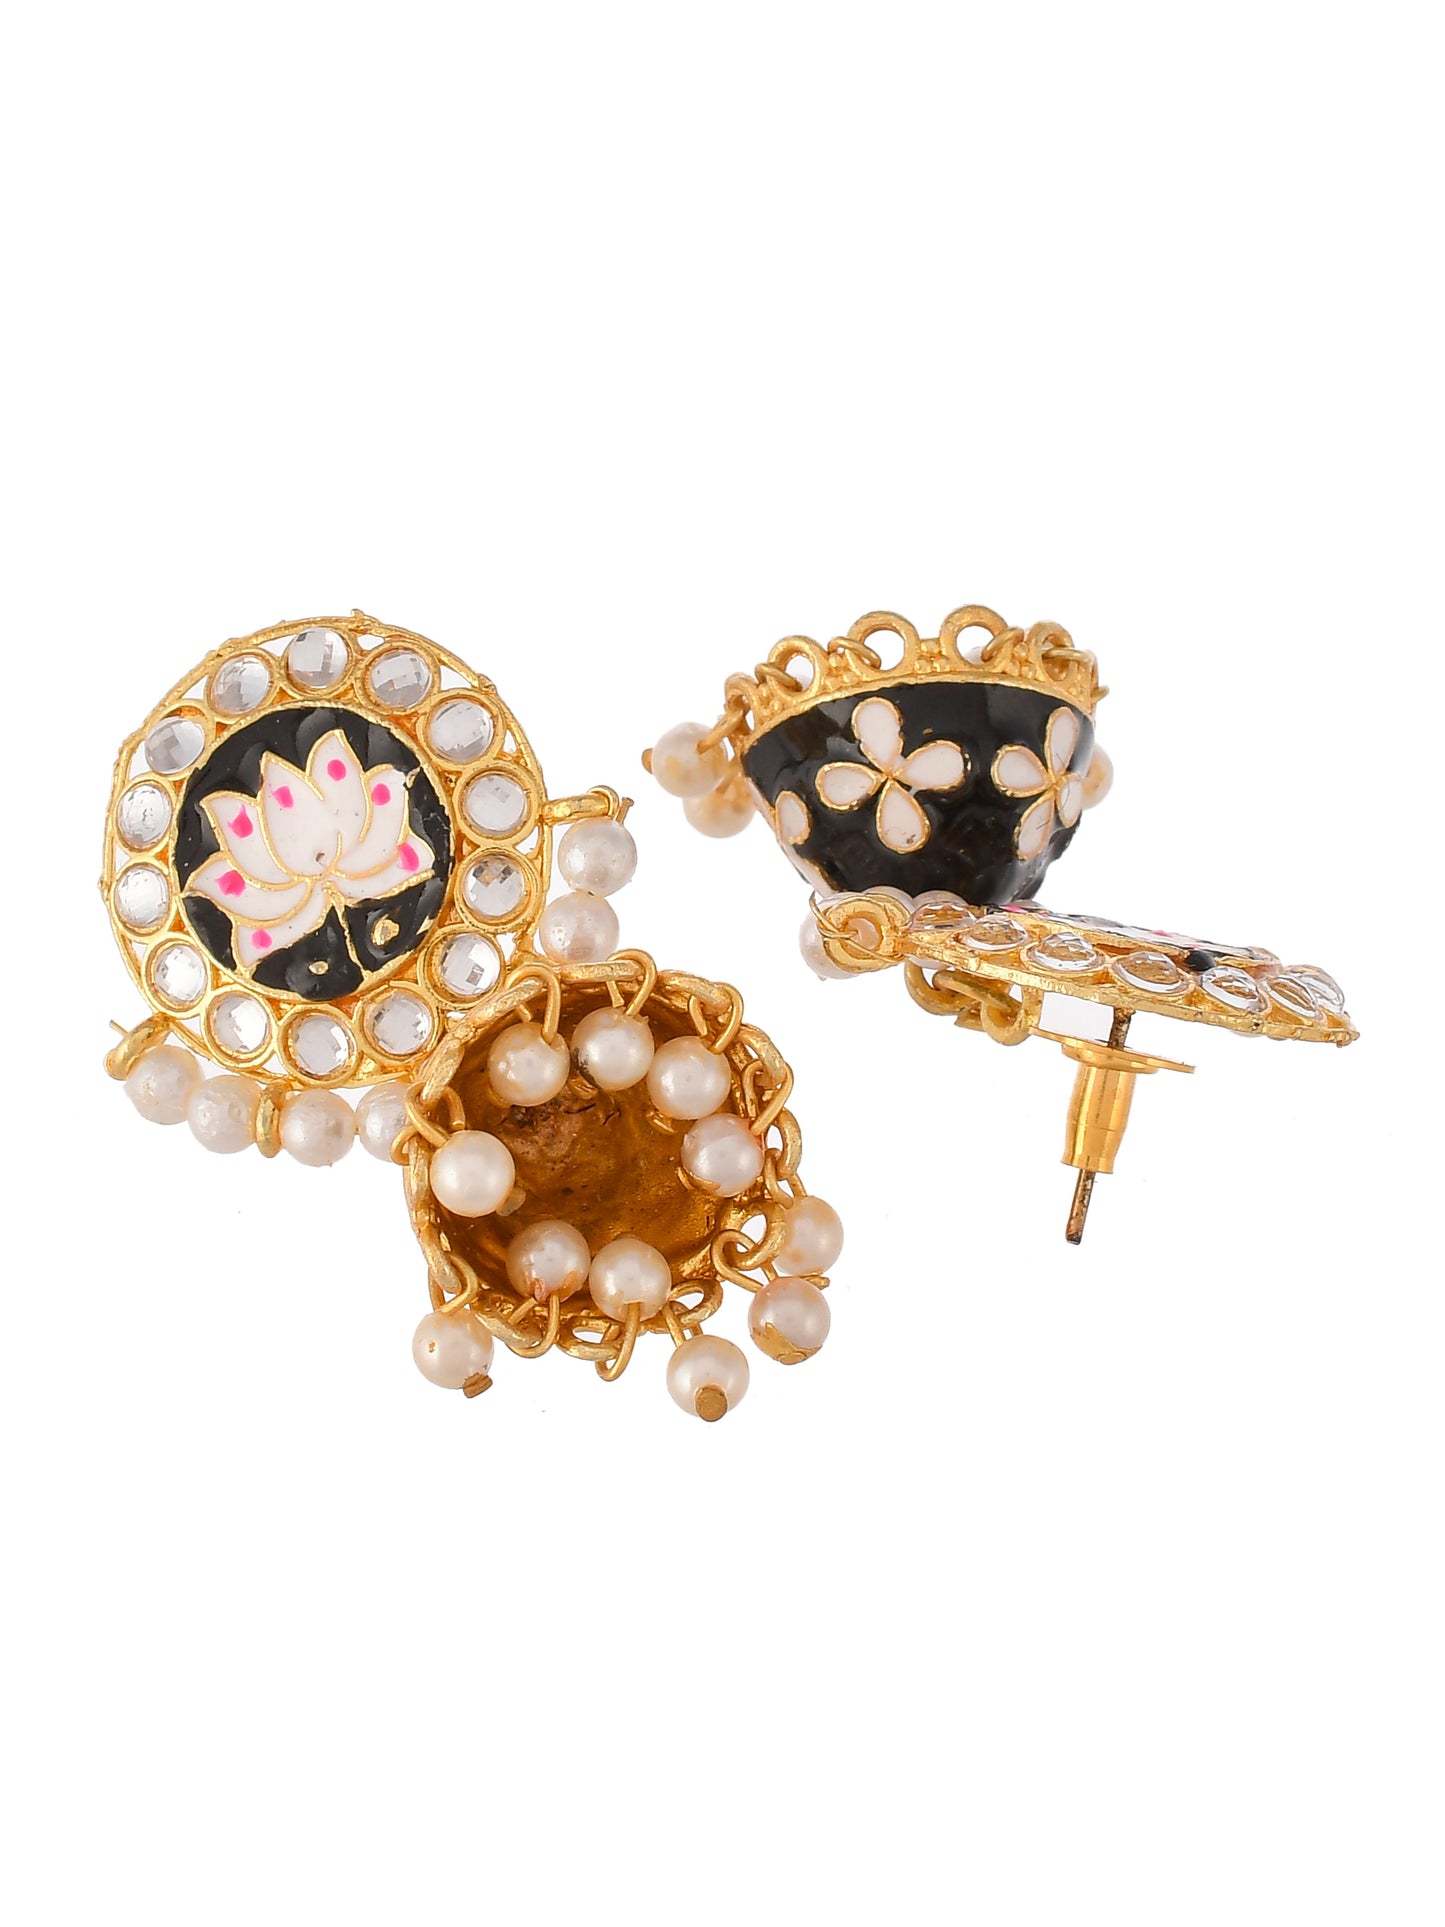 Gold & Black Toned Kundan Studded Handcrafted Floral Drop Earrings